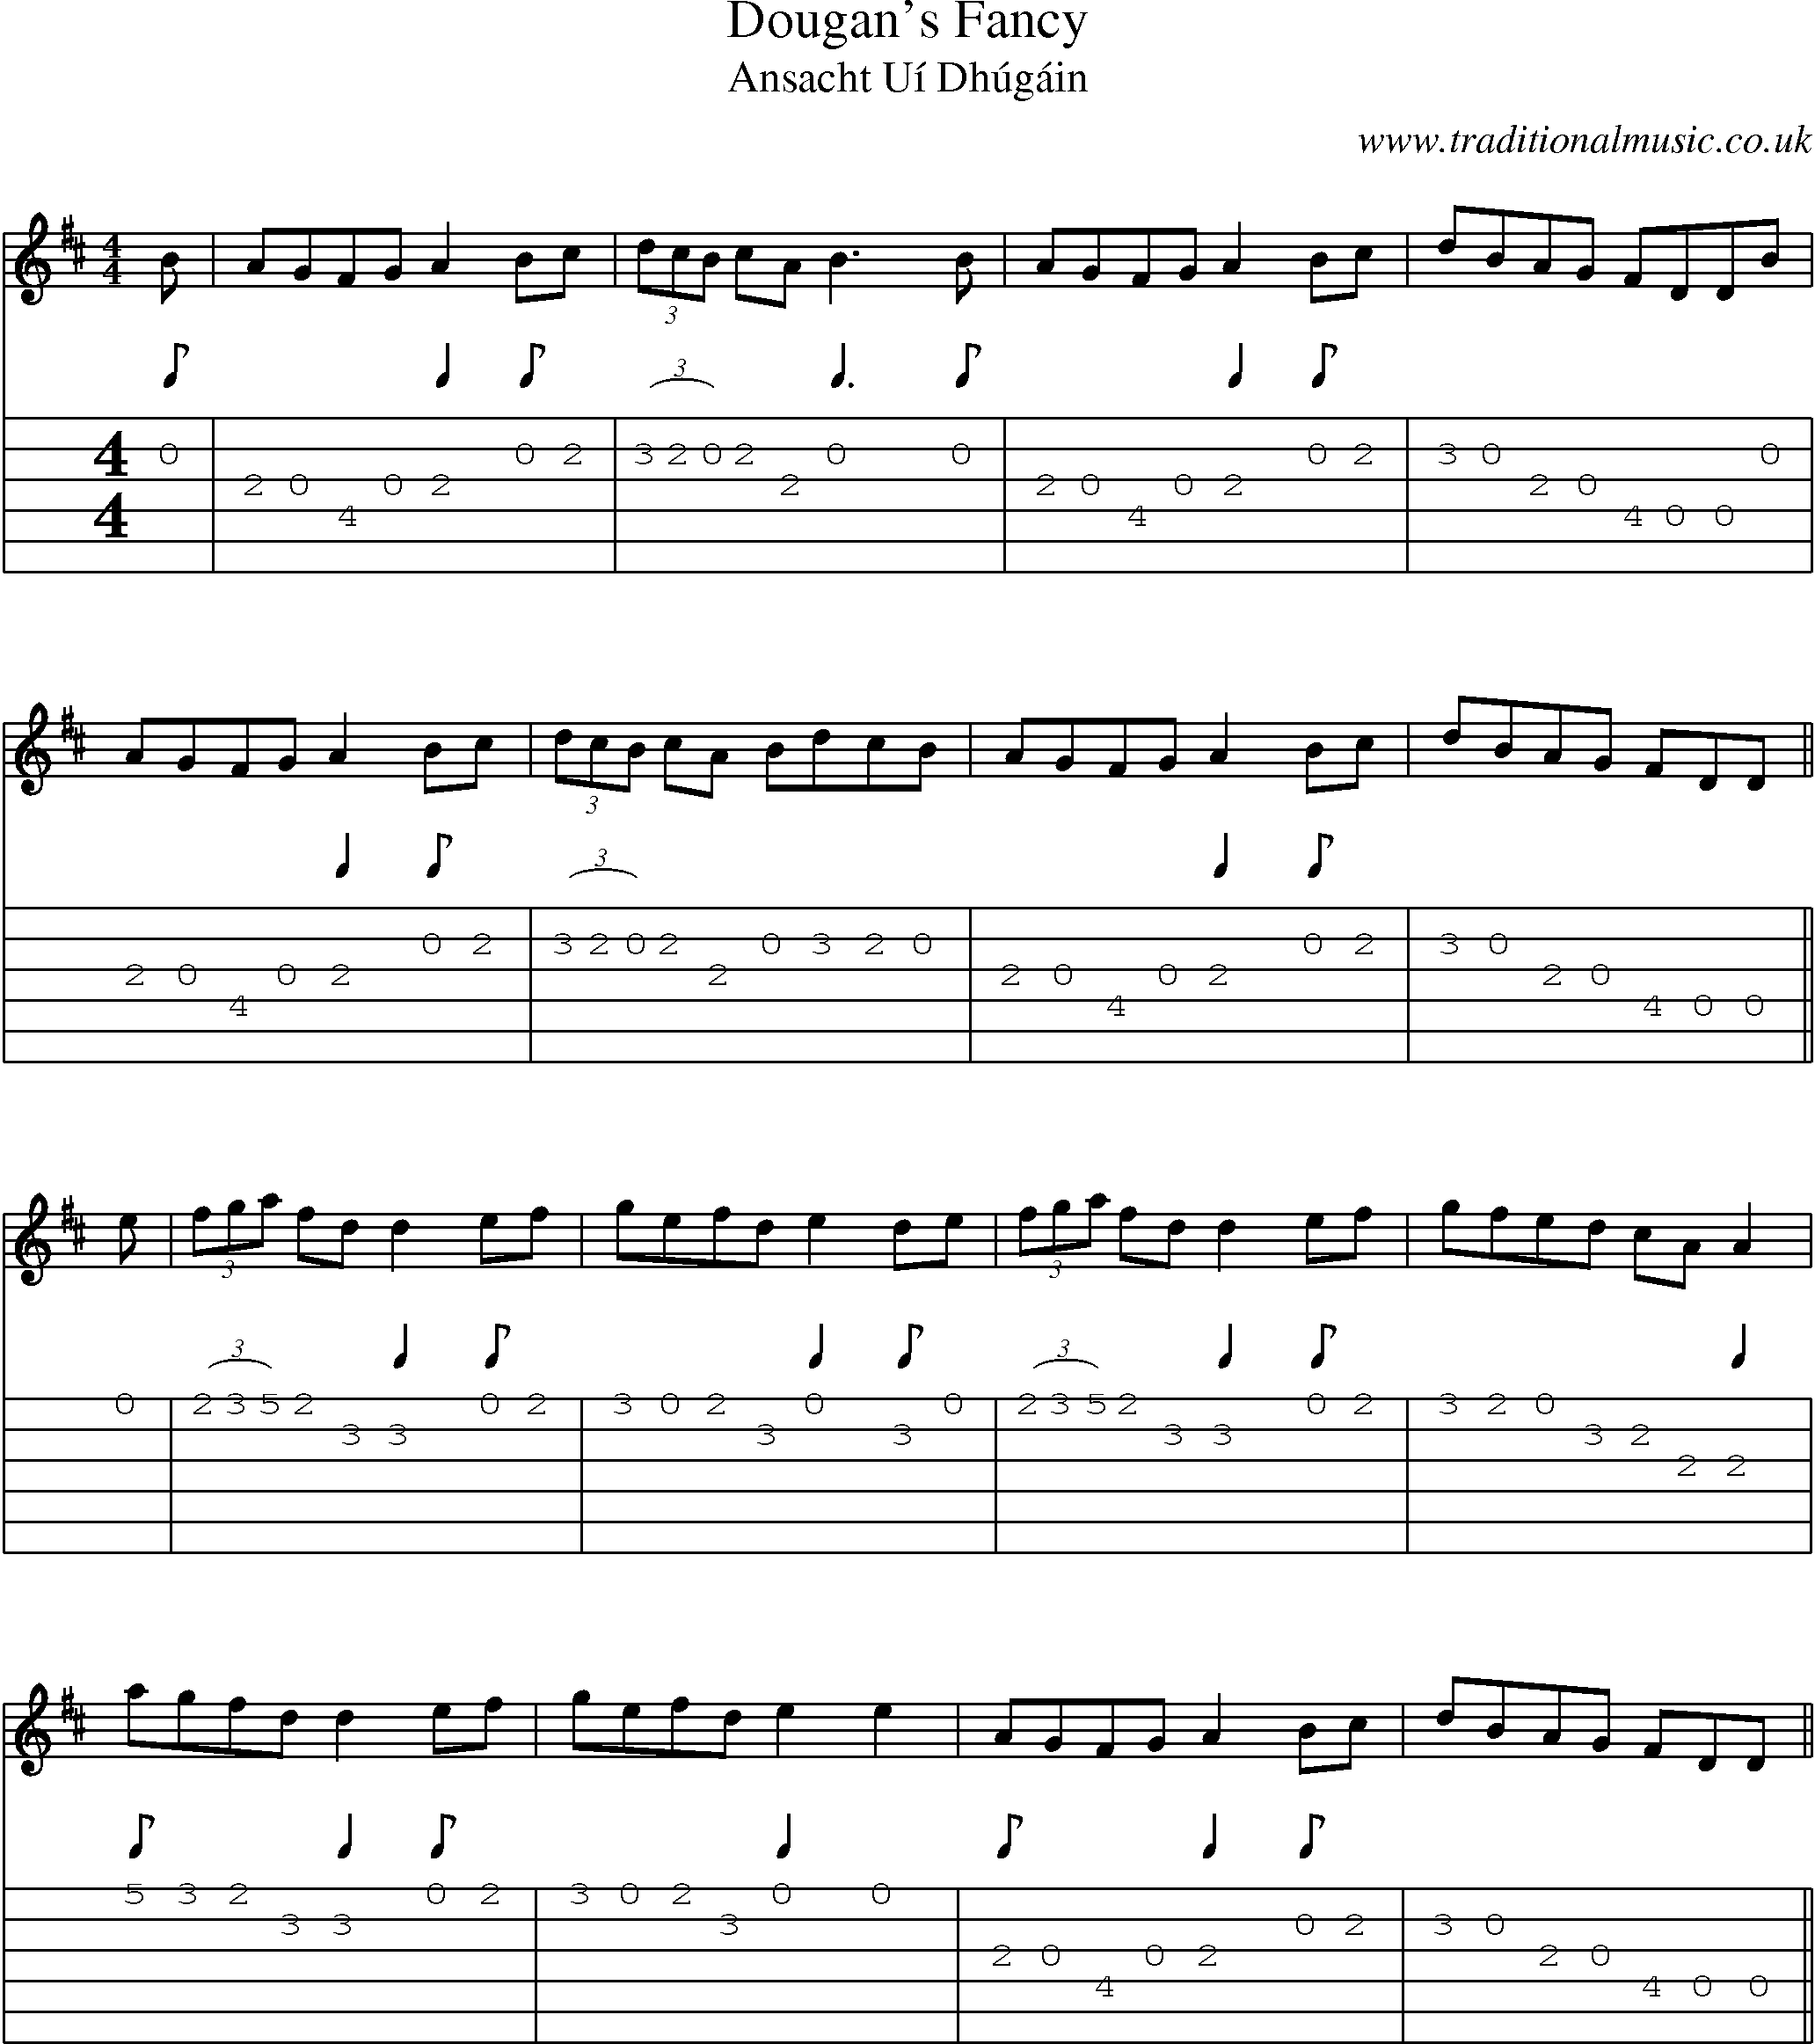 Music Score and Guitar Tabs for Dougans Fancy